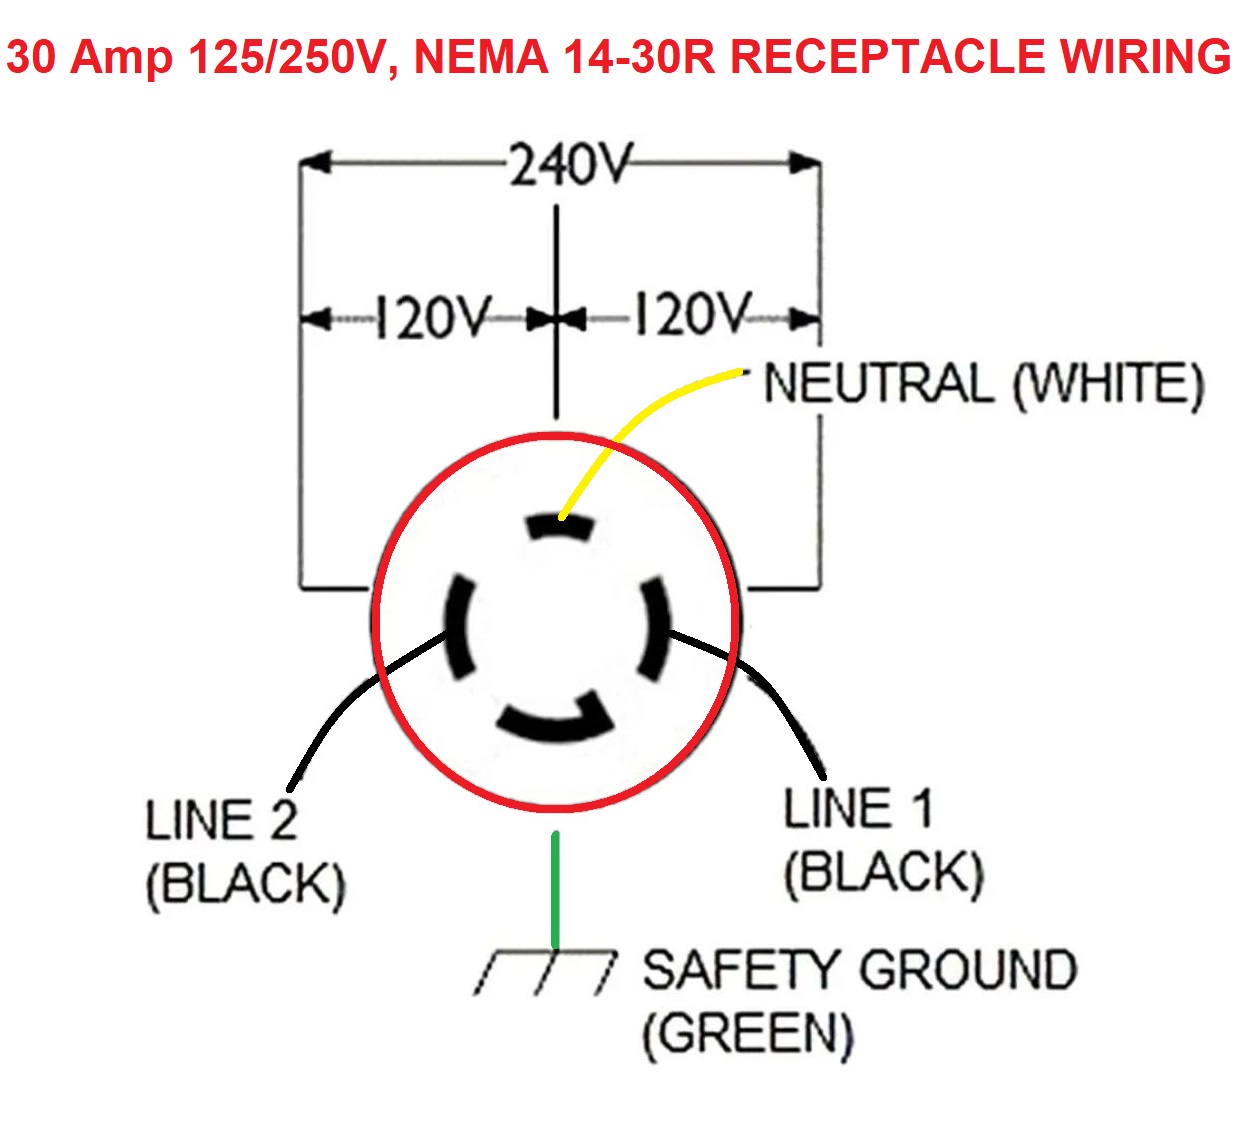 Electrical Wire Size Required for Receptacles, How to choose the proper wire  size for an electrical plug outlet or wall plug  20a 120v Wire Plug Wiring Diagram    InspectAPedia.com